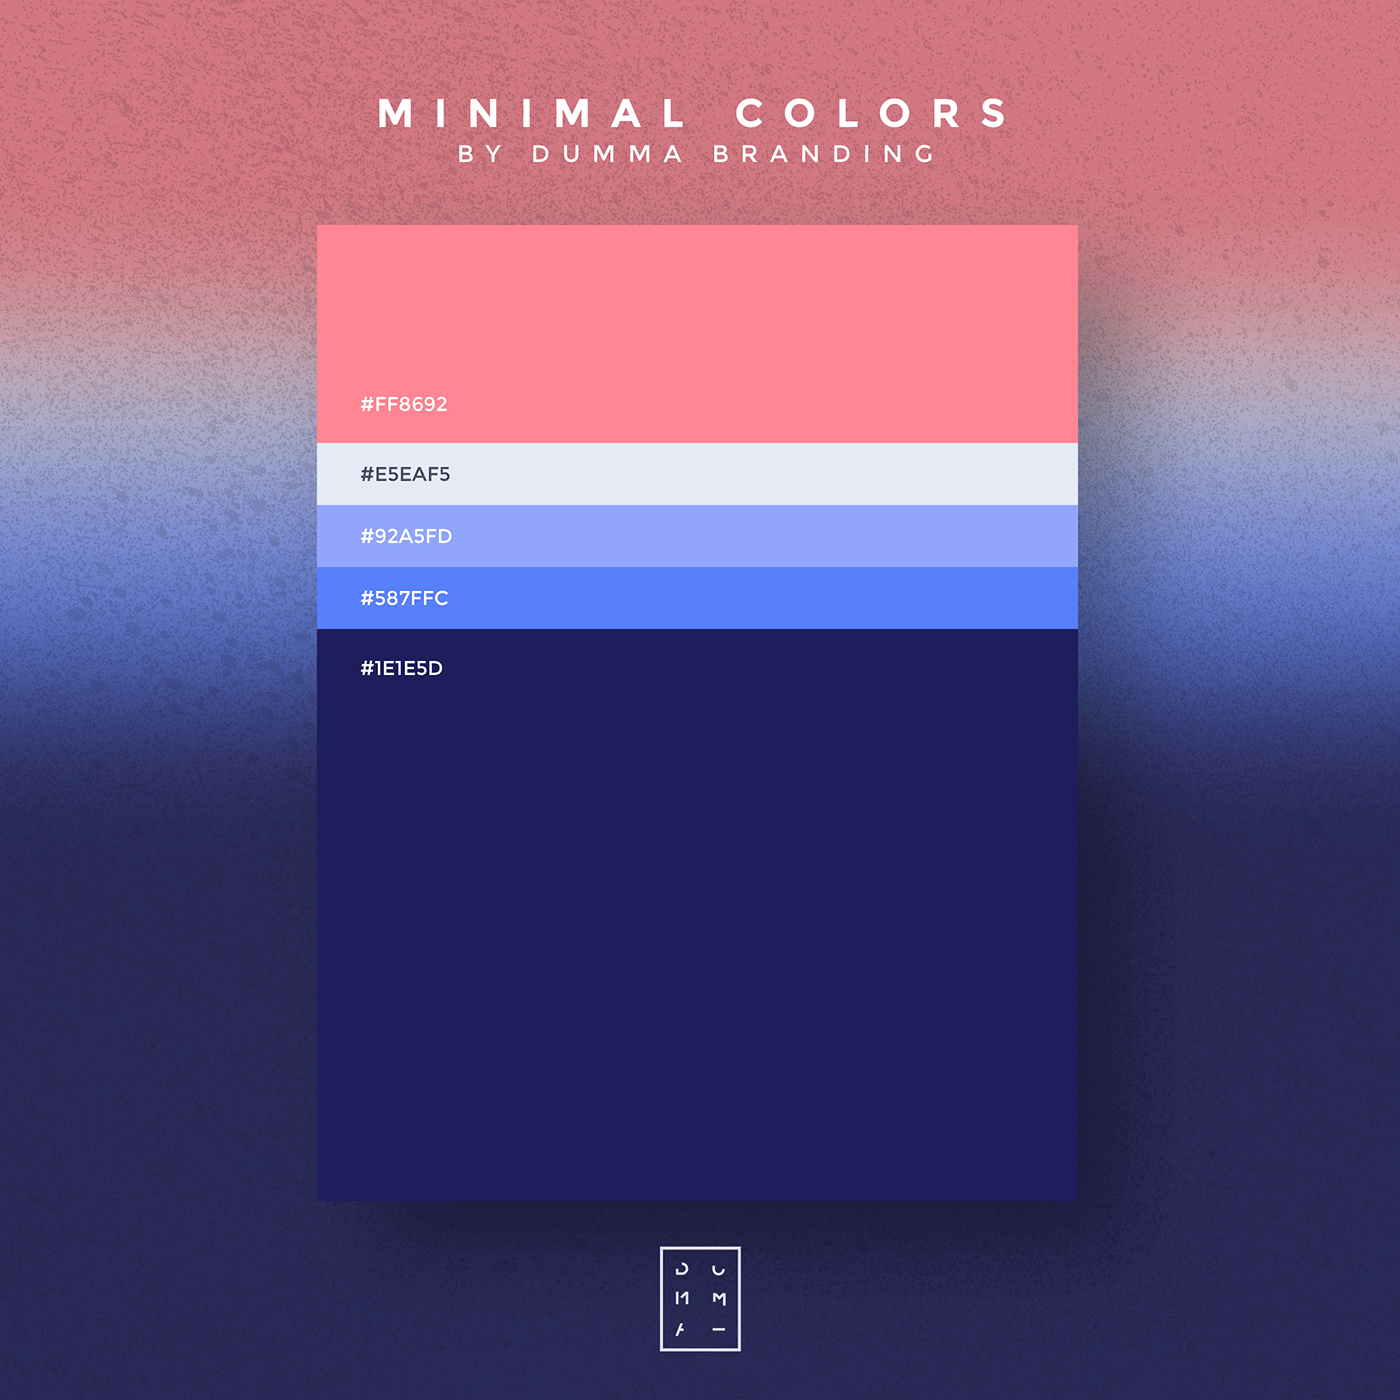 minimalcolors color colortrends colorLOVERS coloroftheday coolcolors